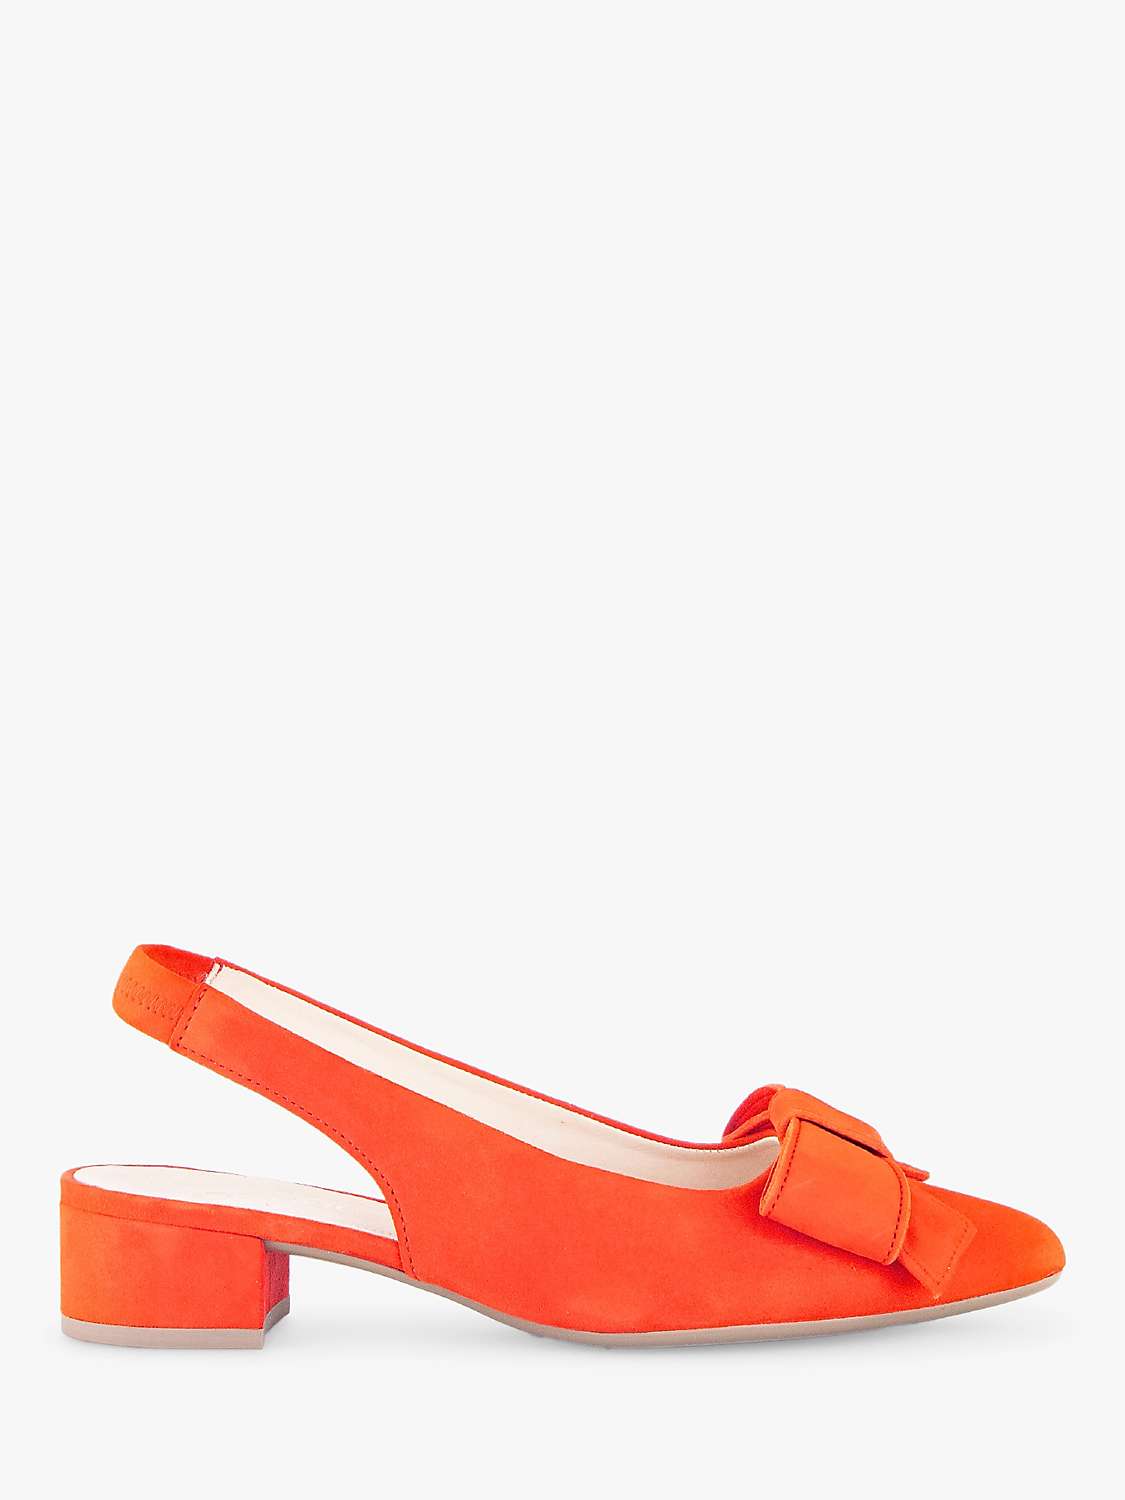 Buy Gabor Monte Carlo Suede Large Bow Detail Slingback Shoes Online at johnlewis.com